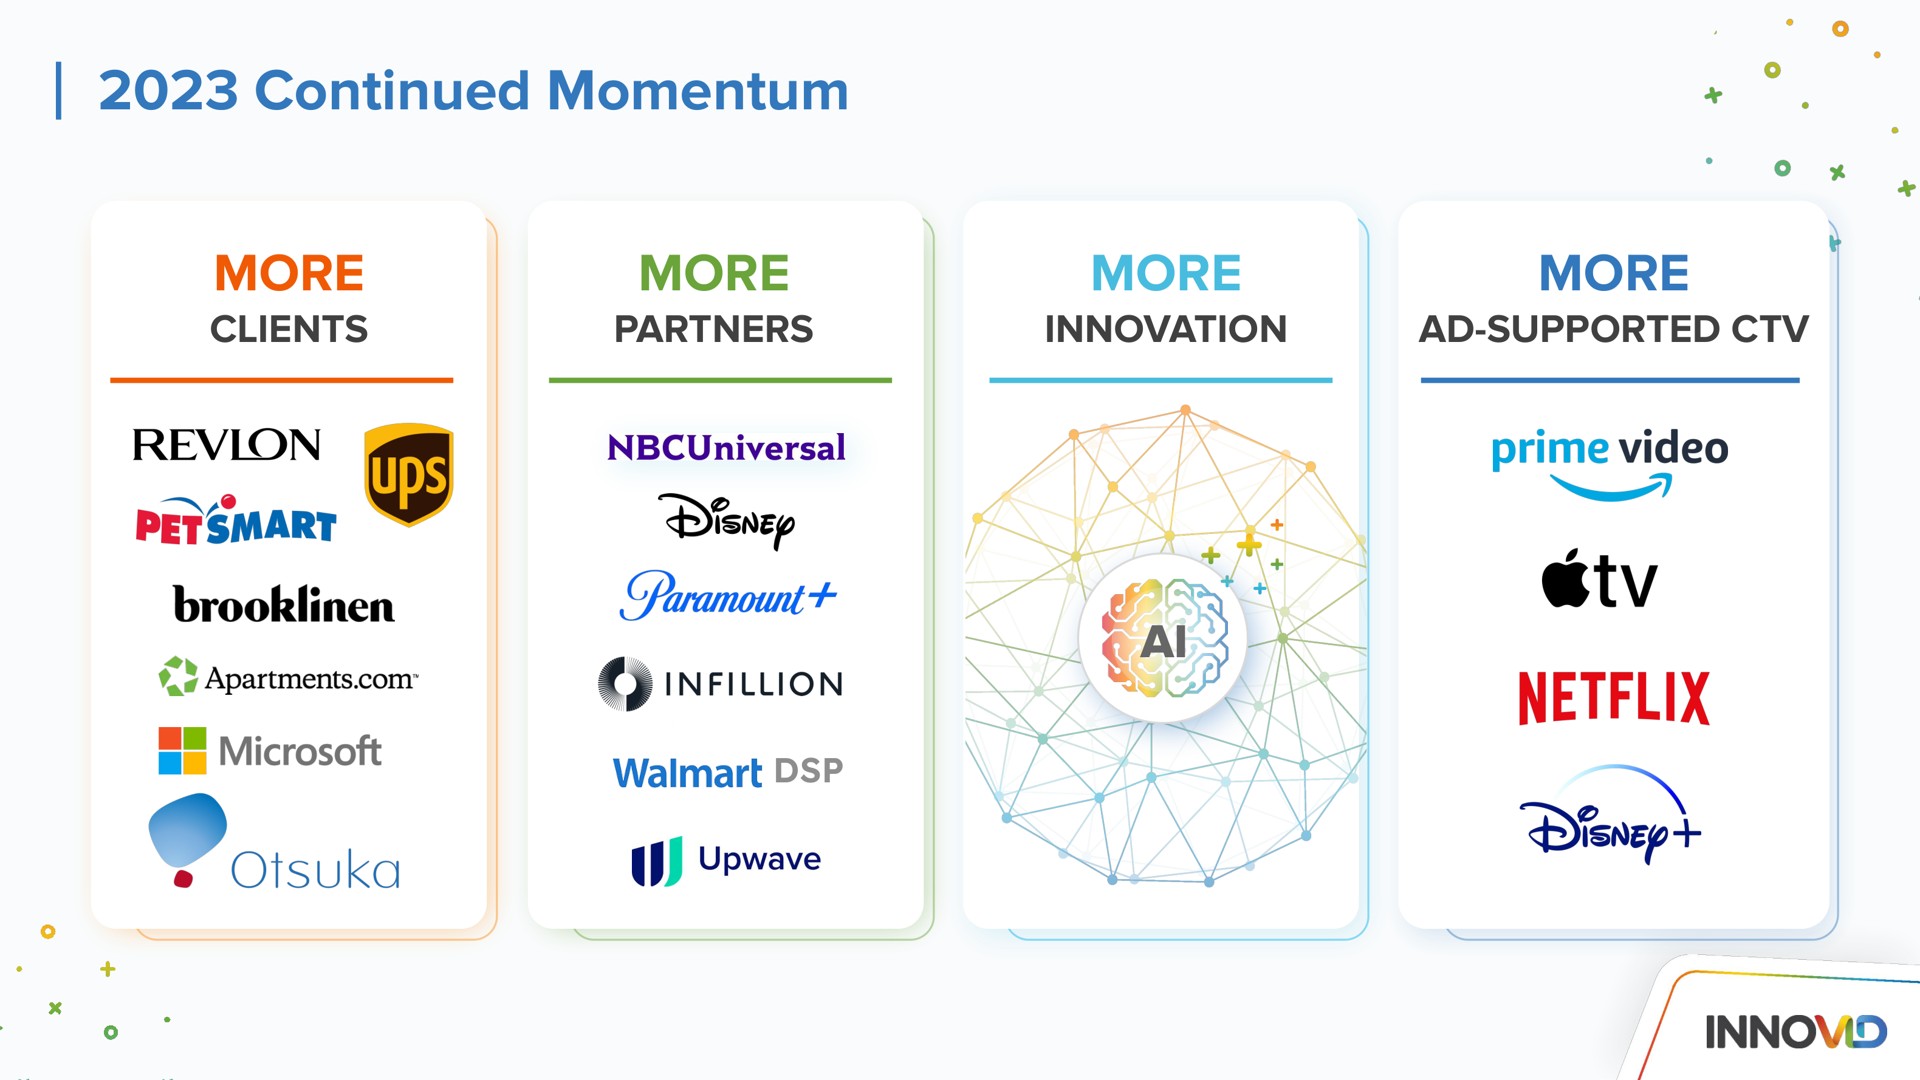 continued momentum more more more more paramount | Innovid